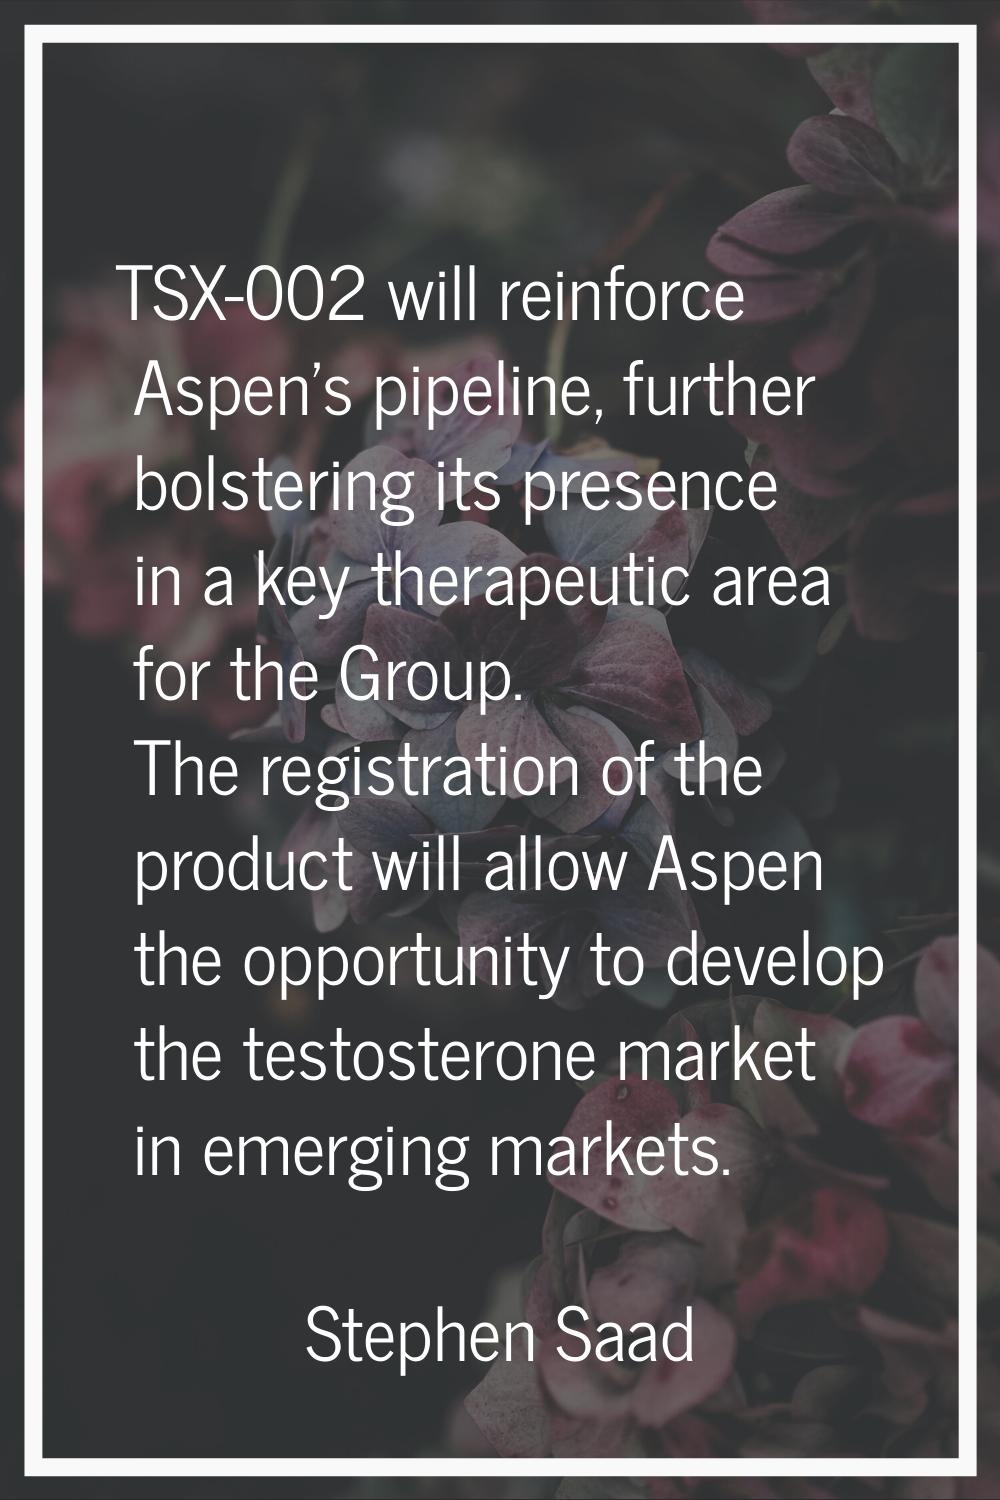 TSX-002 will reinforce Aspen's pipeline, further bolstering its presence in a key therapeutic area 